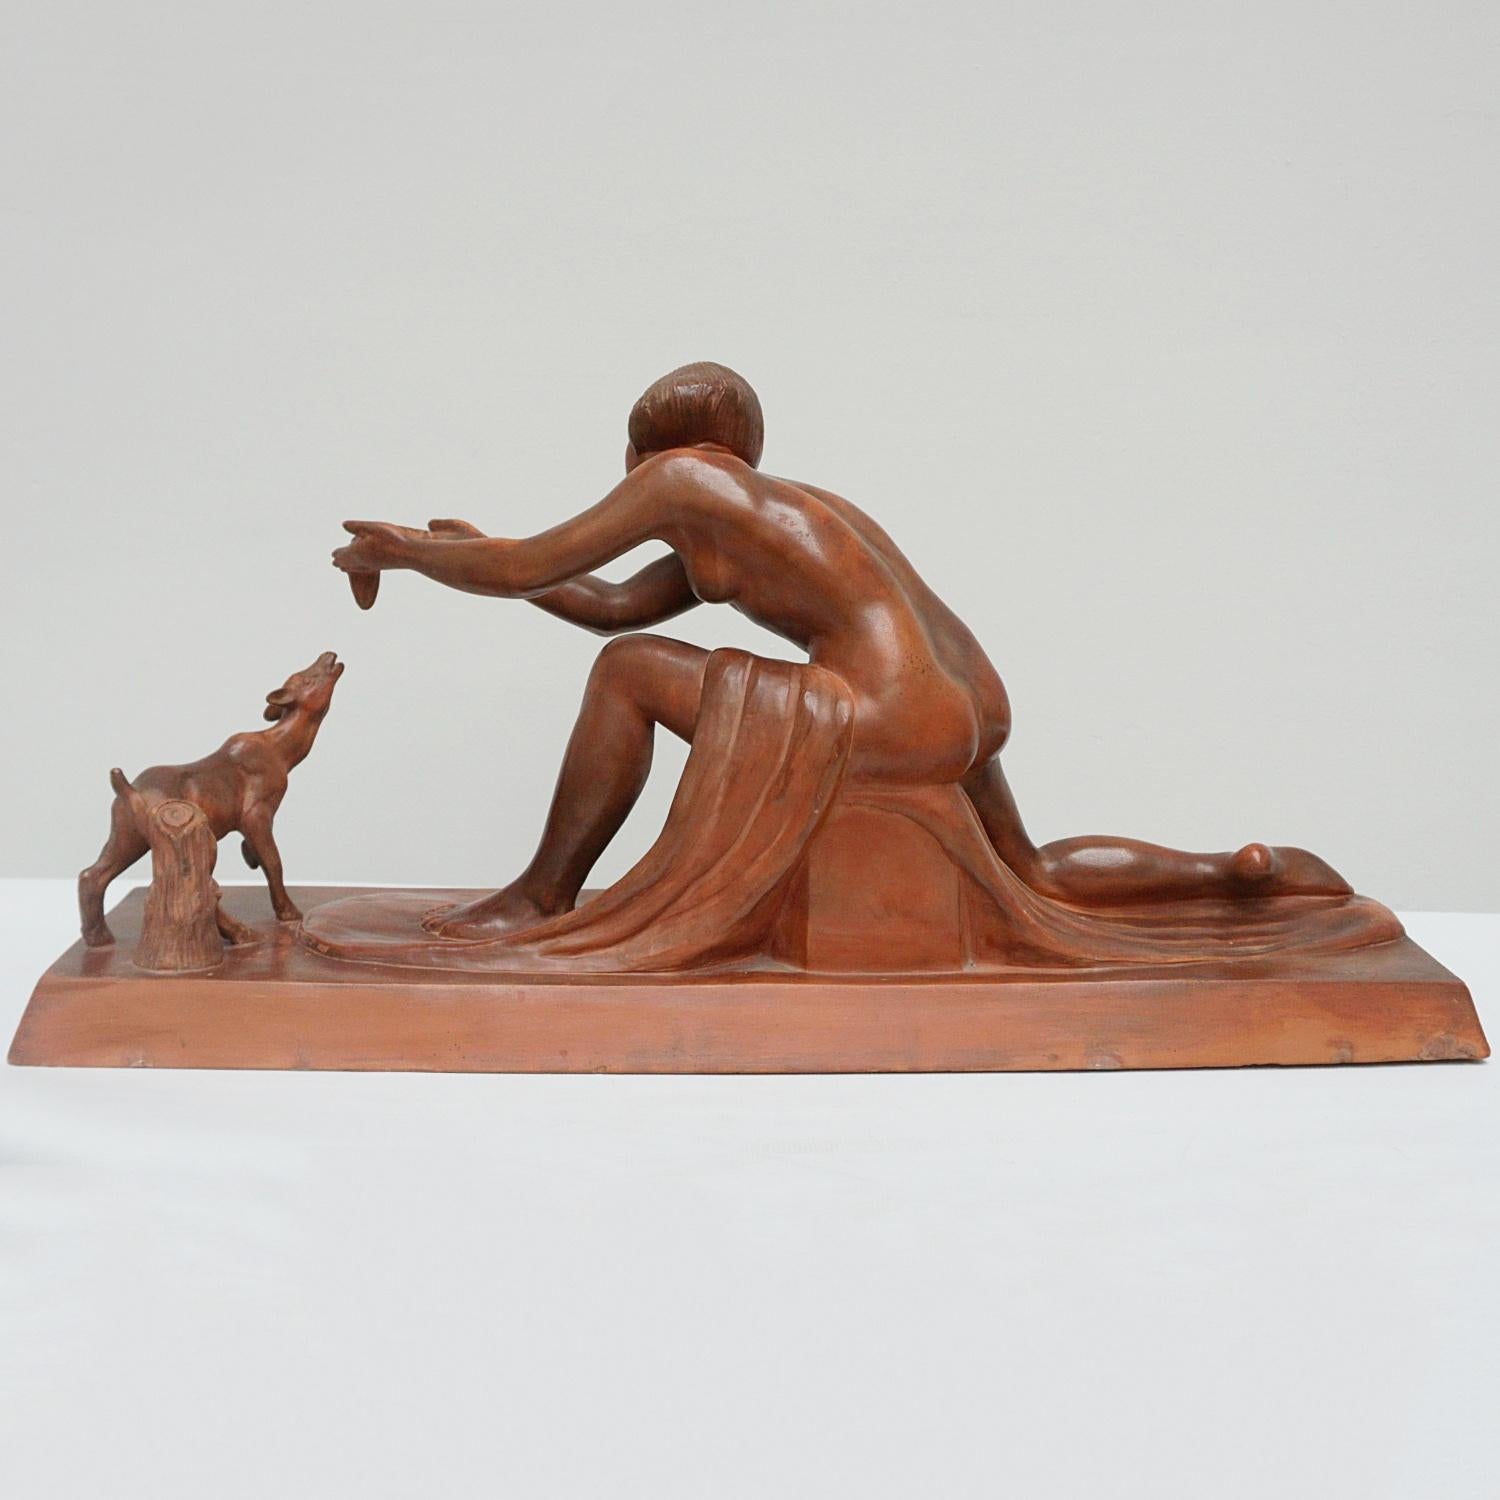 An Art Deco terracotta sculpture by Clarice Levy-Kinsbourg depicting a nude girl feeding a baby young fawn with her robes draped around the base. Signed 'Clarisse Levy' to base. 

Dimensions: H 37cm W 74cm D 21cm

Origin: French

Date: Circa